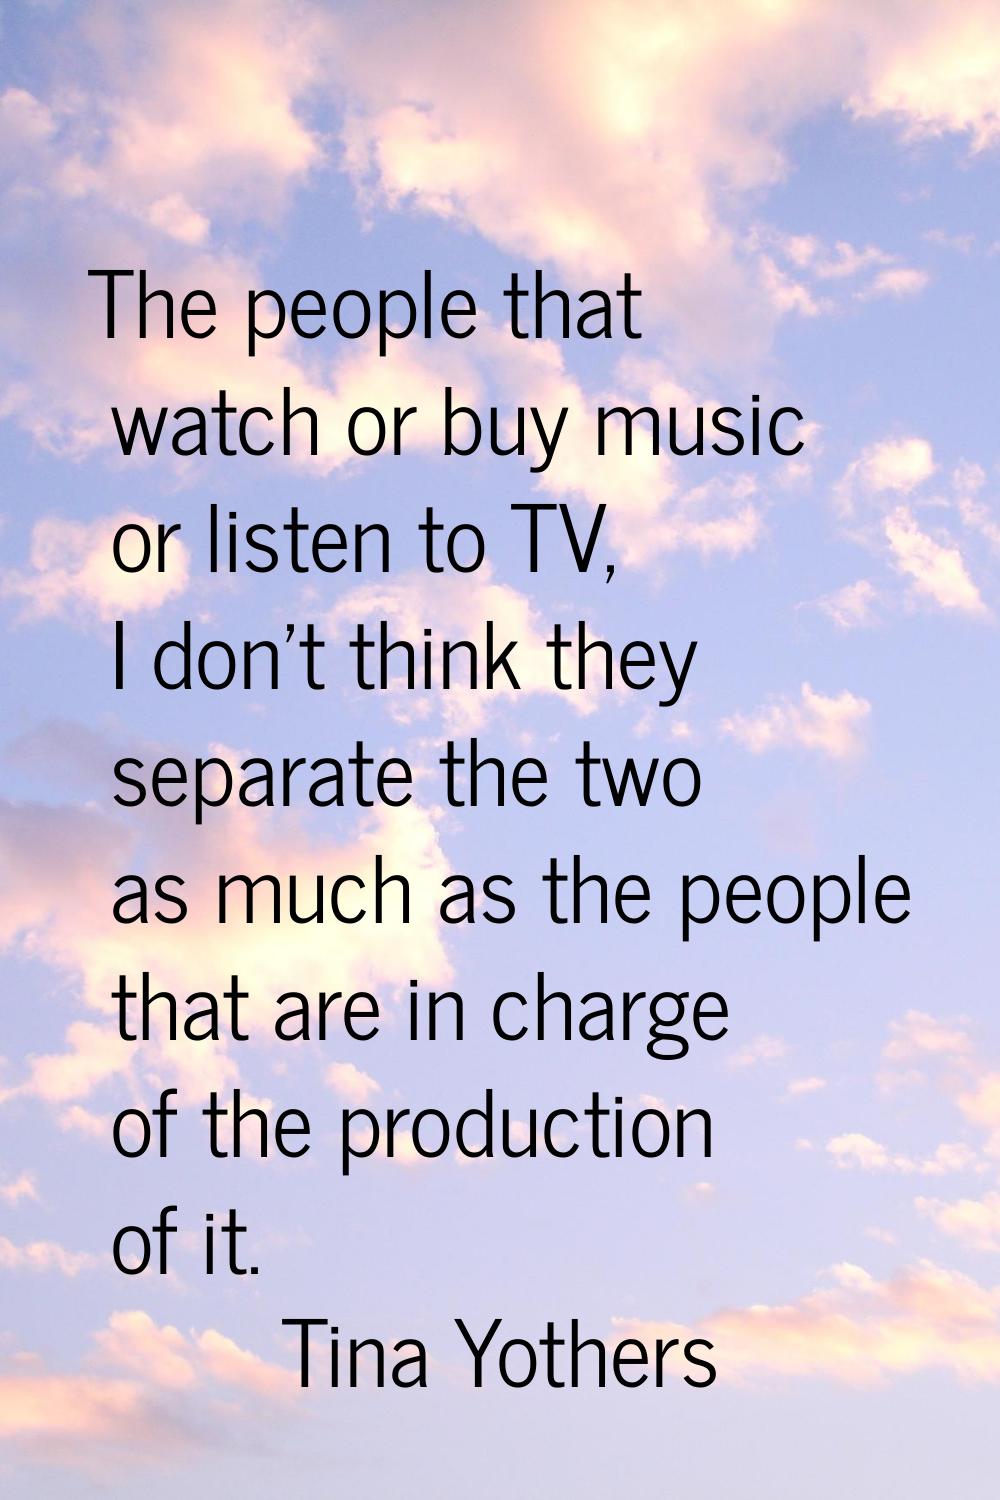 The people that watch or buy music or listen to TV, I don't think they separate the two as much as 